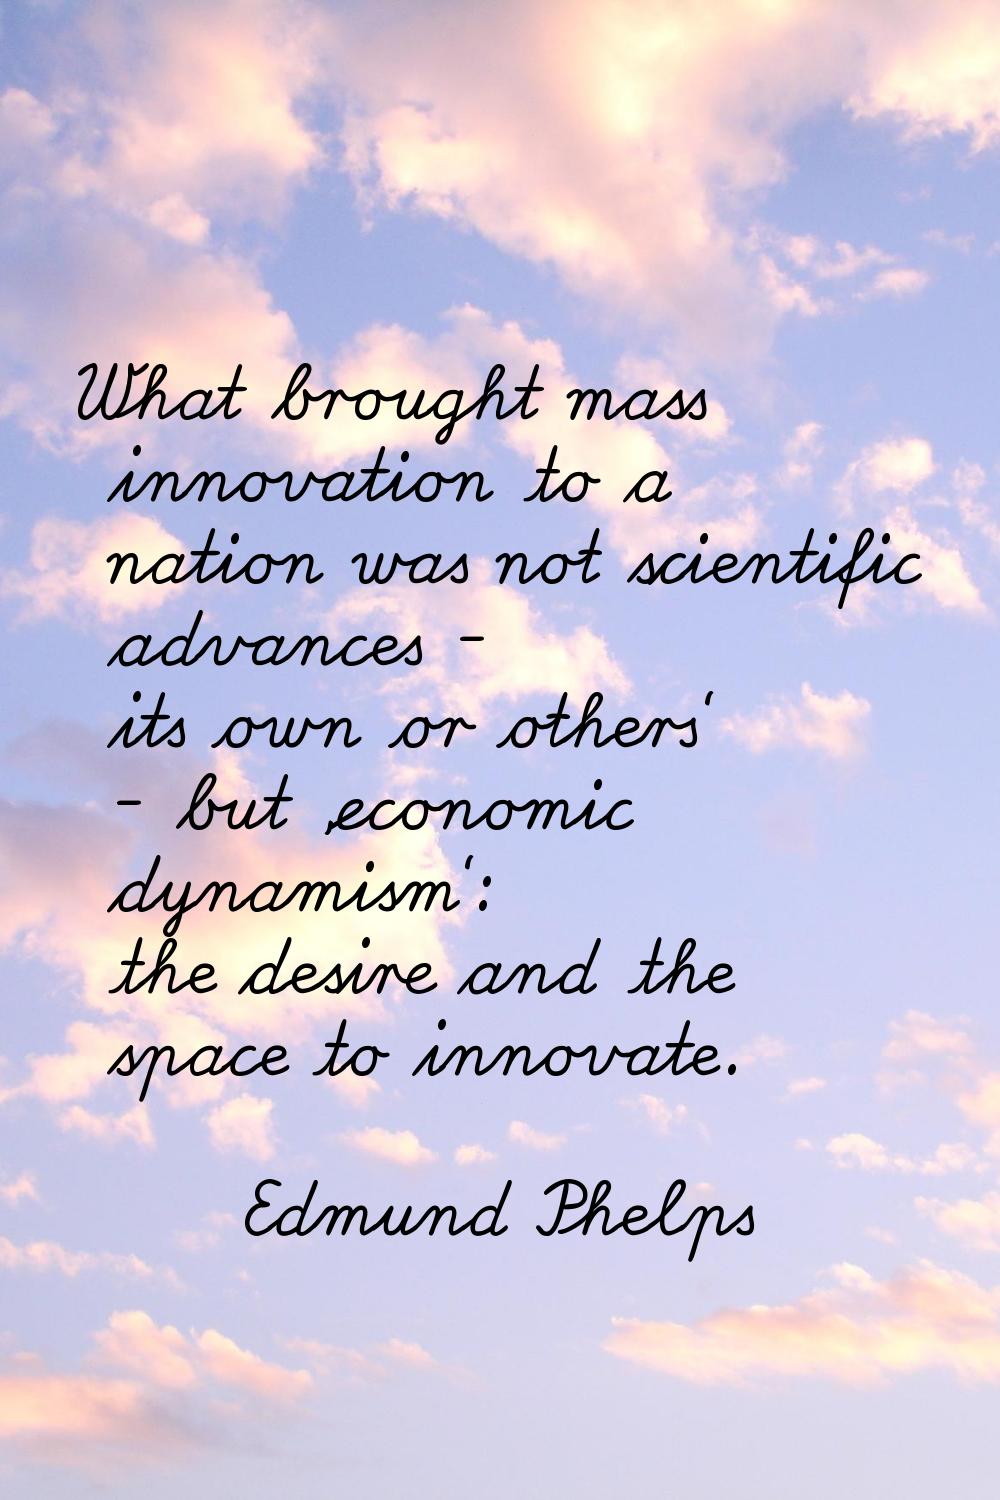 What brought mass innovation to a nation was not scientific advances - its own or others' - but 'ec